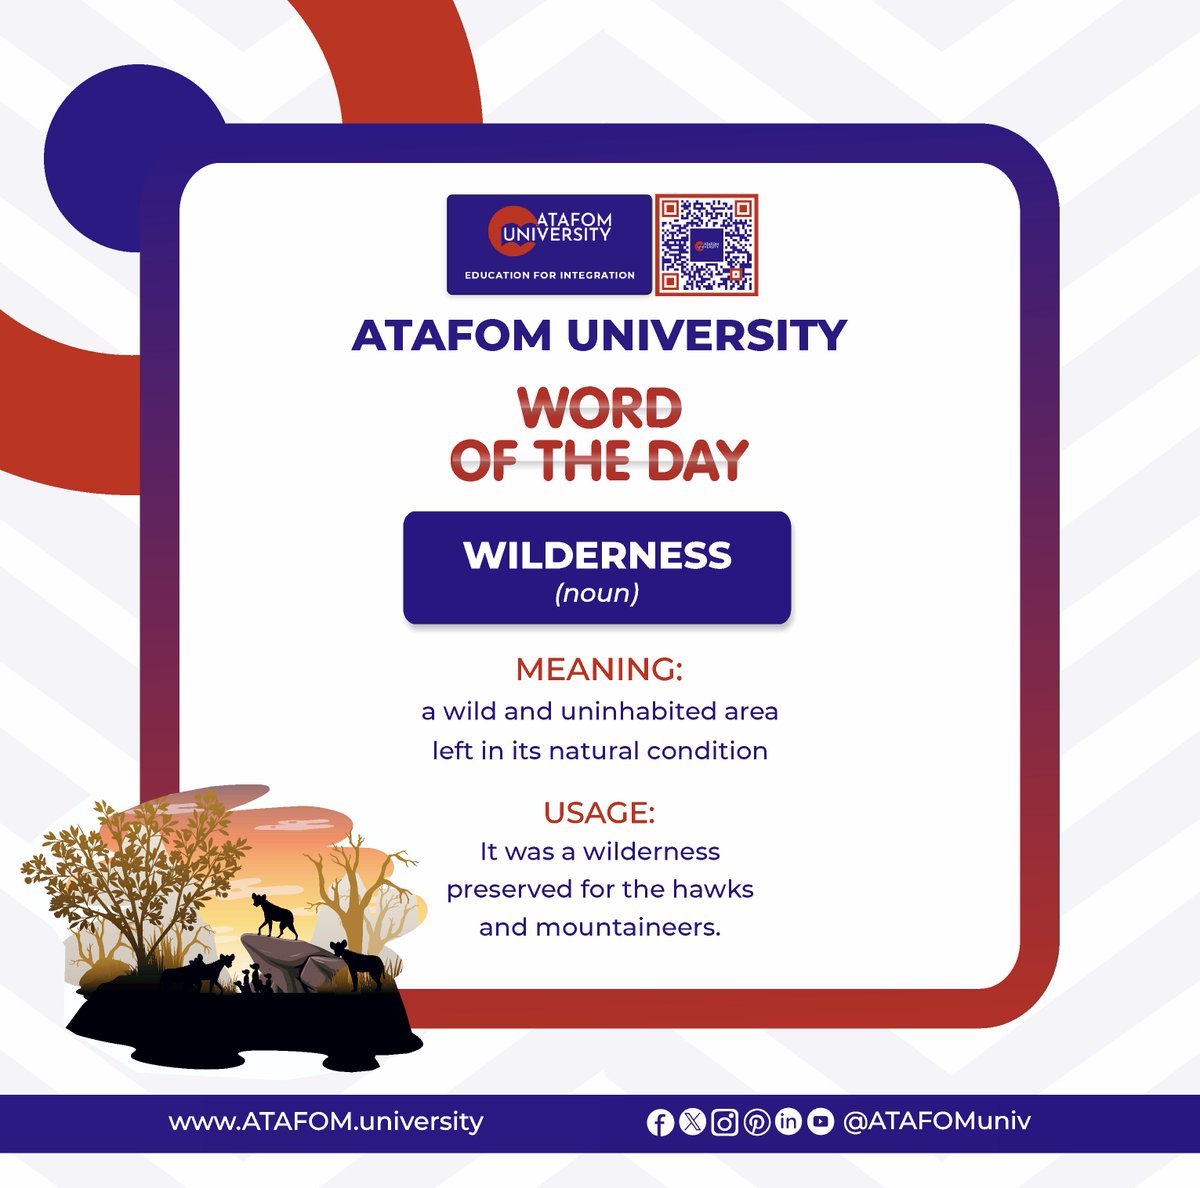 Expanding Horizons: Today's Word of the Day - WILDERNESS.
Let's learn, grow, and integrate together!

#ATAFOMUniversity #EducationForIntegration #WordOfTheDay #LearnAndGrow #GlobalEducation #DiversityAndInclusion #LanguageLearning #IntegrationMatters #EducationMatters…